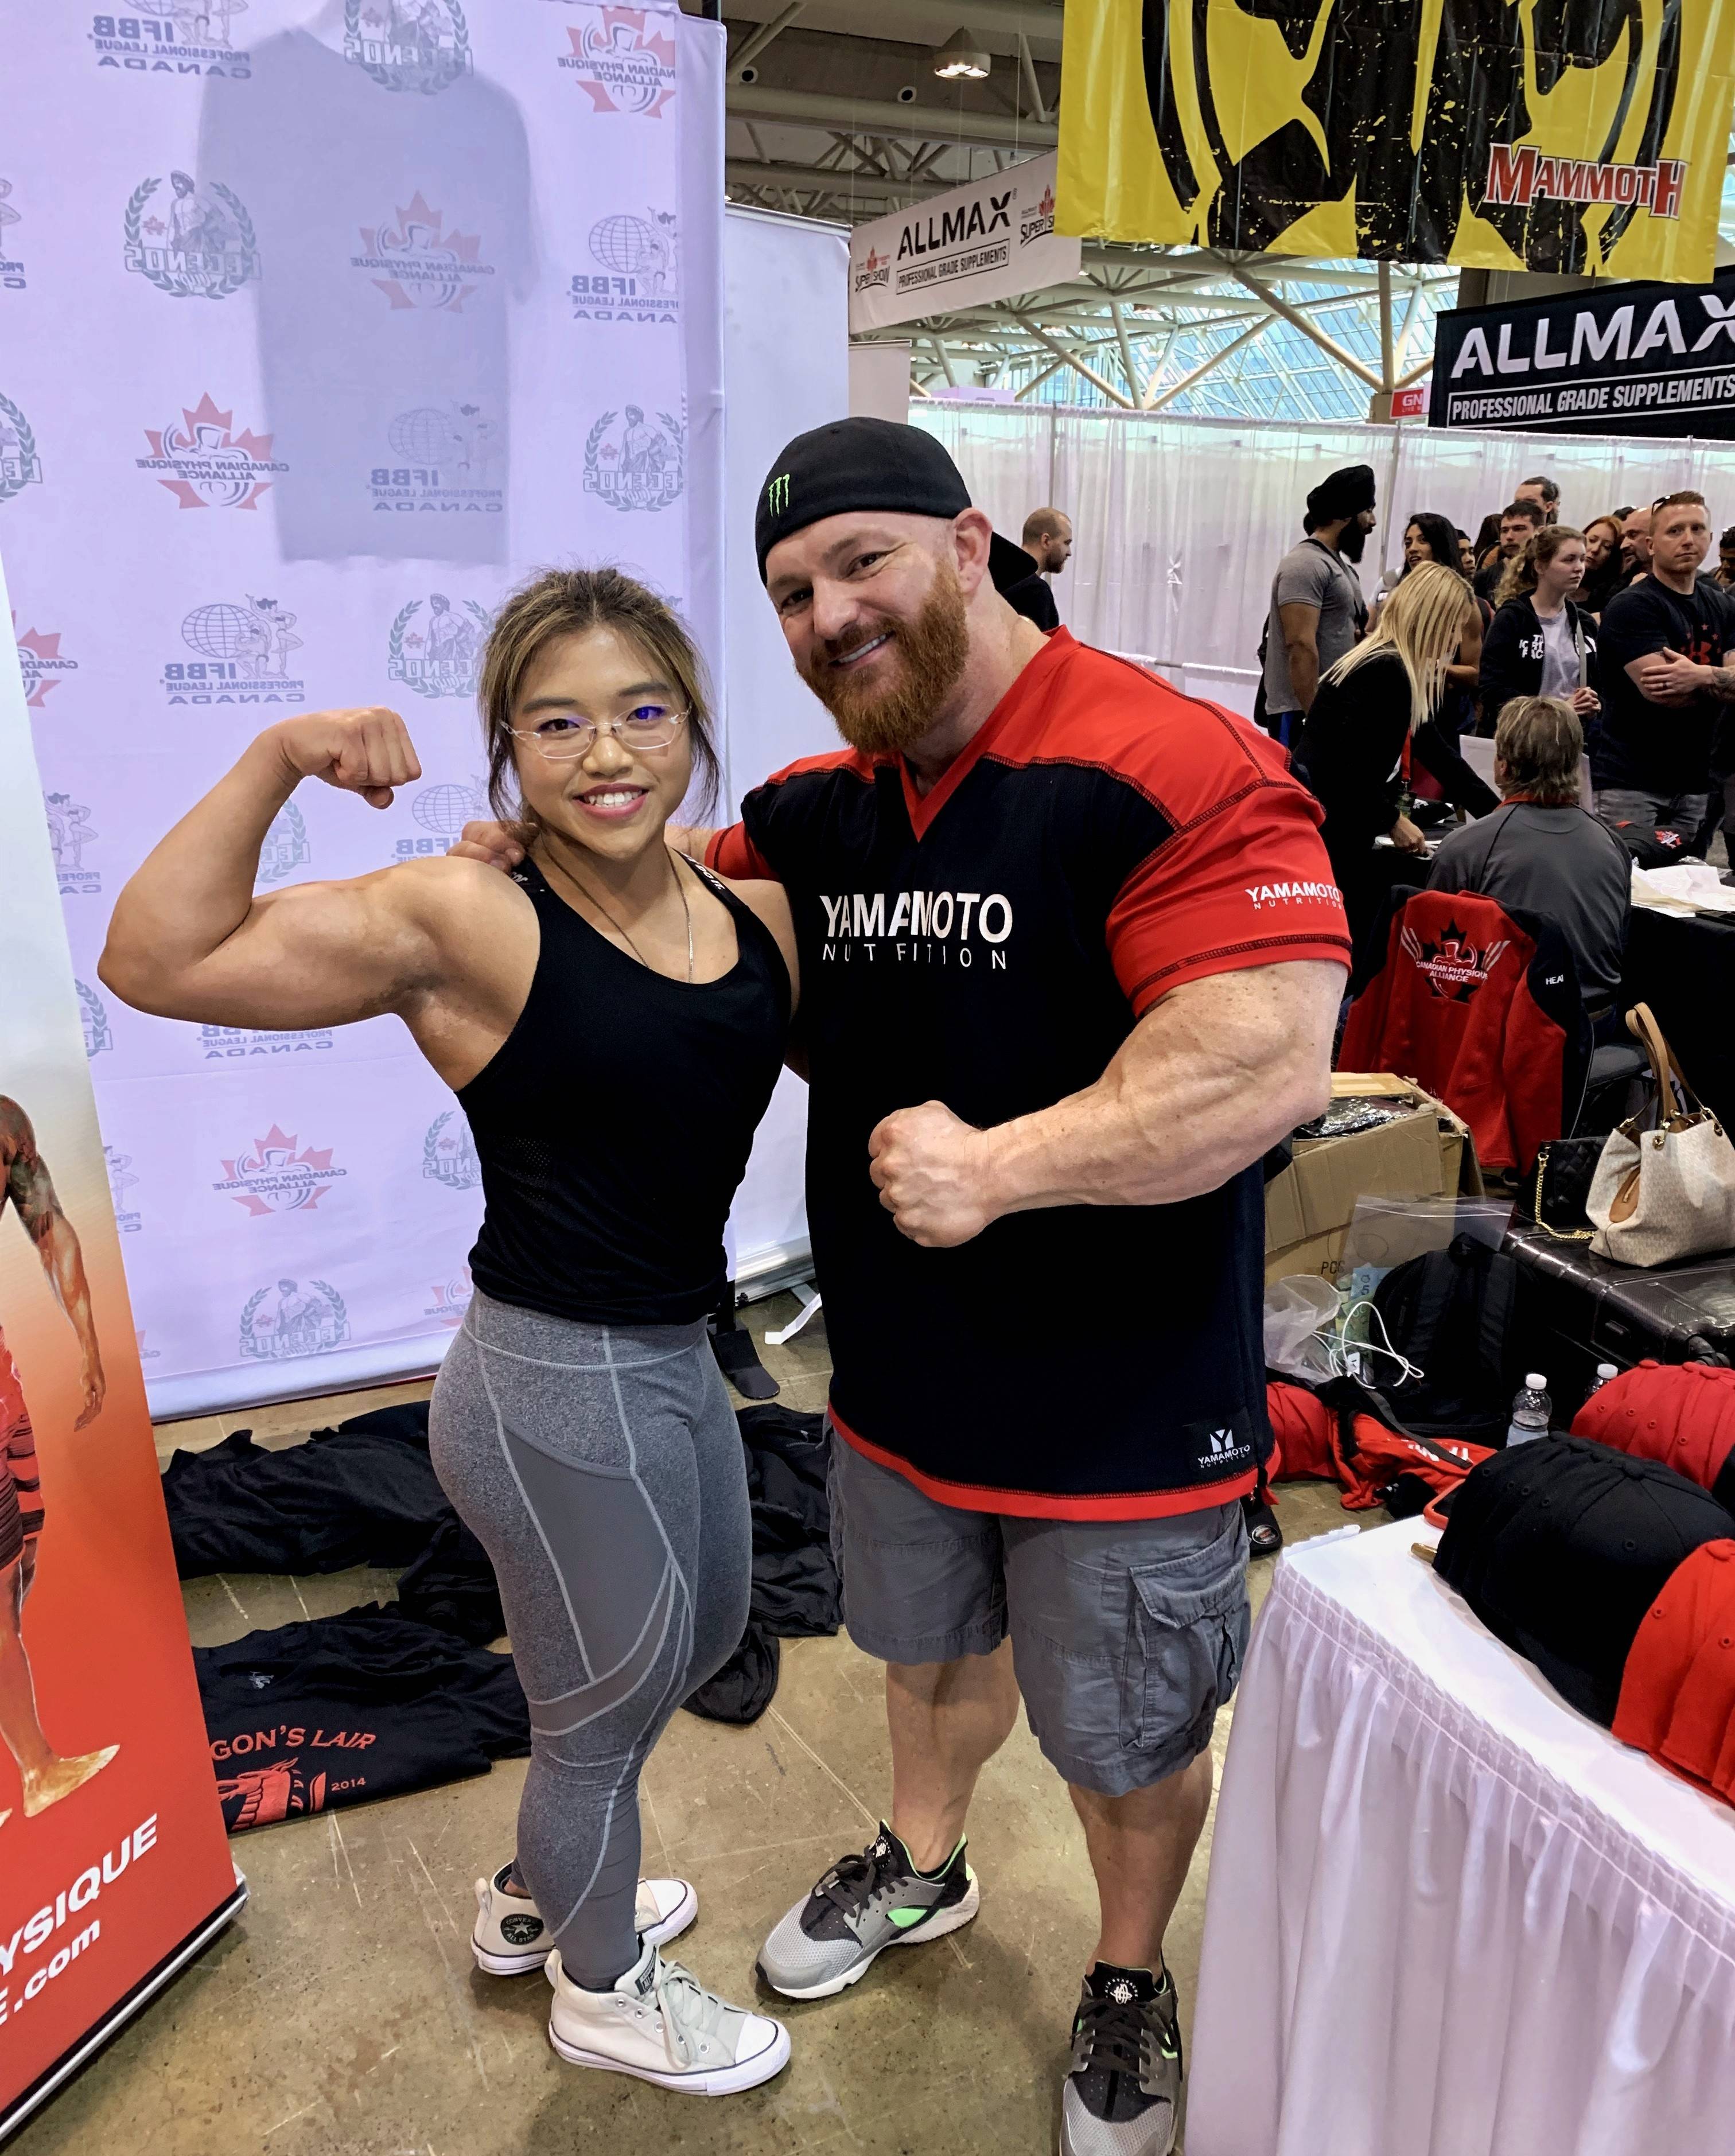 2018 Olympia 212 Bodybuilding Winner Flex Lewis After Contest Interview  With Tony Doherty - NPC News Online